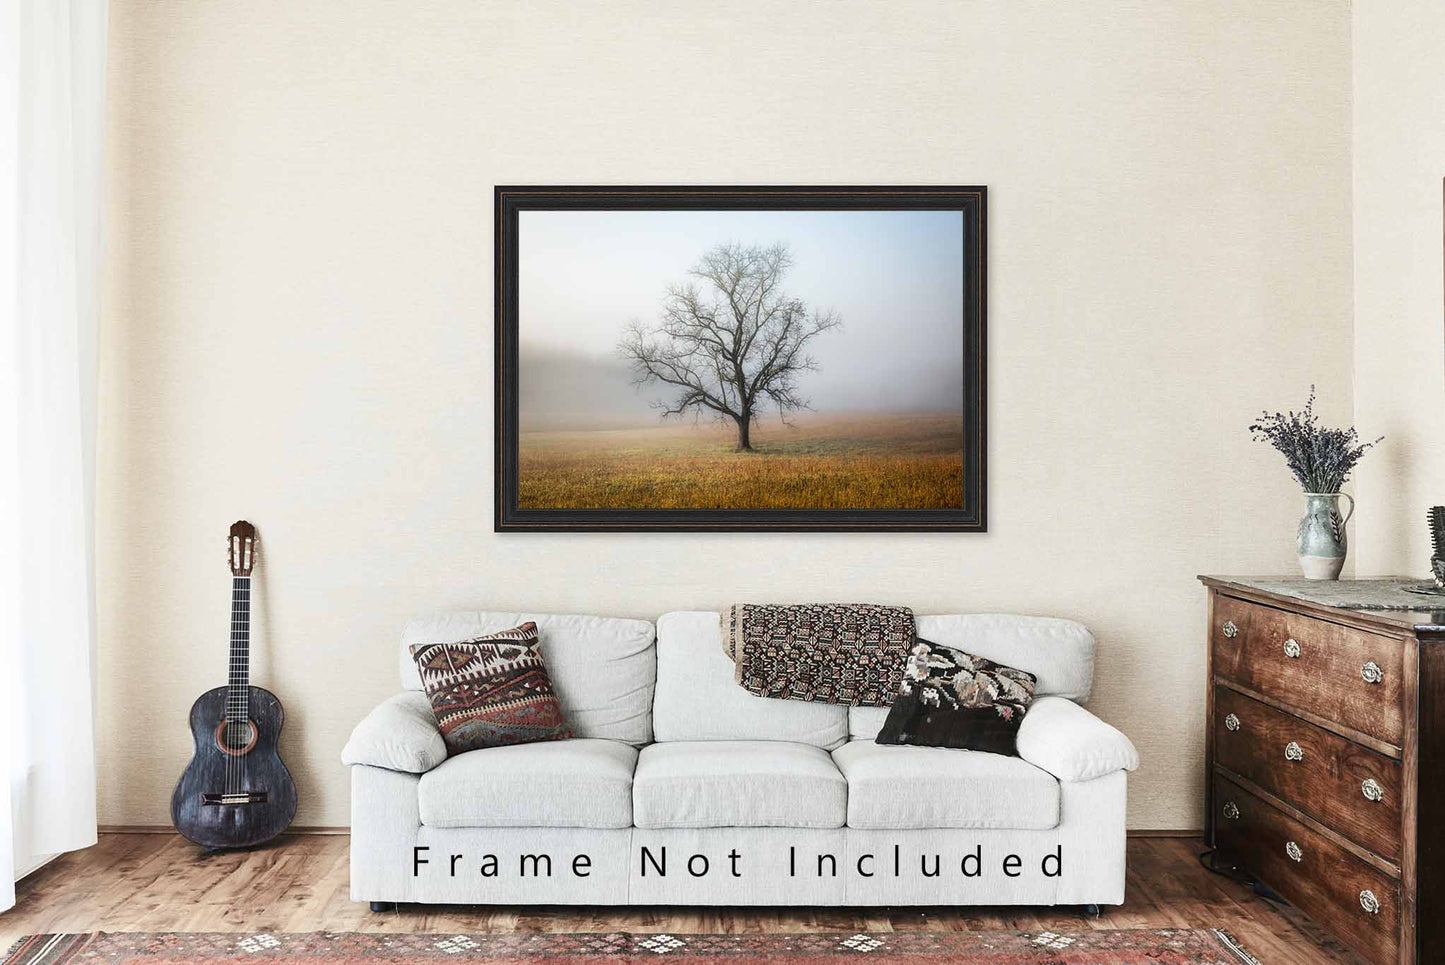 Nature Photography Print (Not Framed) Picture of Leafless Tree Shrouded in Fog in Great Smoky Mountains Tennessee Landscape Wall Art Botanical Decor